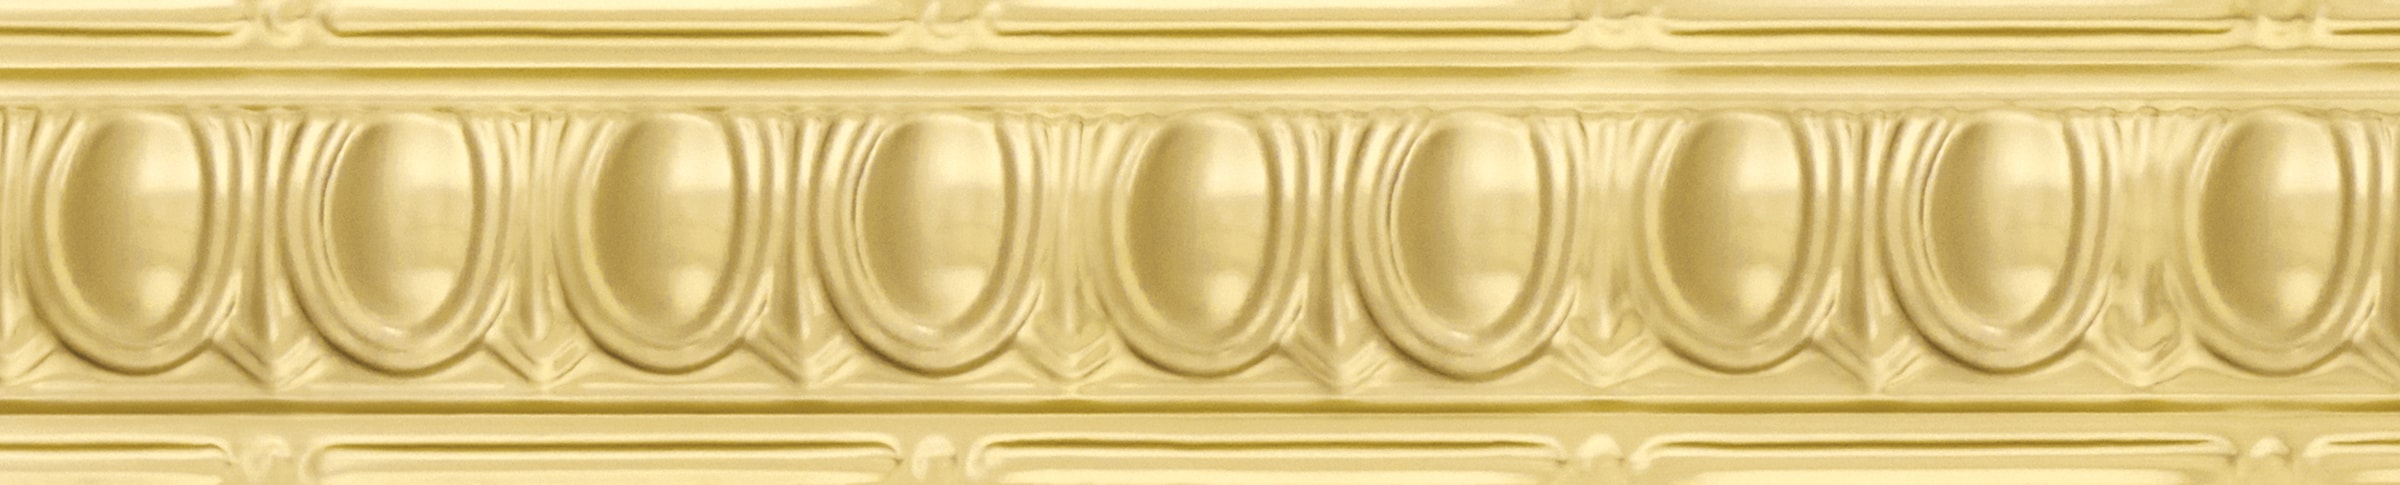 Armstrong Ceilings Metallaire Floral Cornice 48-in Steel Gold Crown Trim at